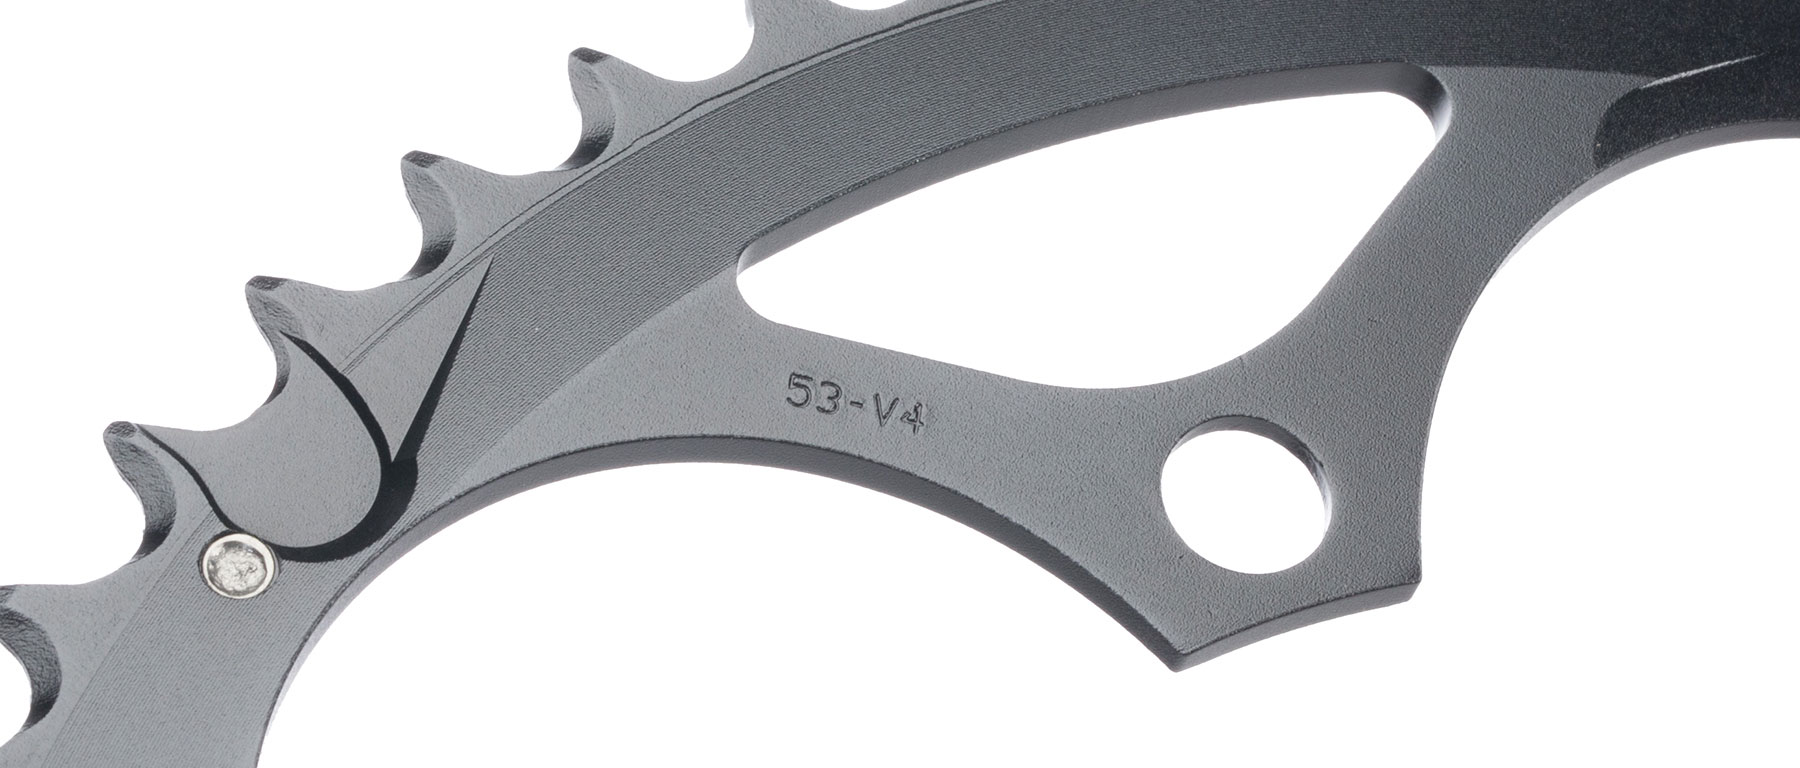 SRAM Powerglide 10-Speed Outer Chainring